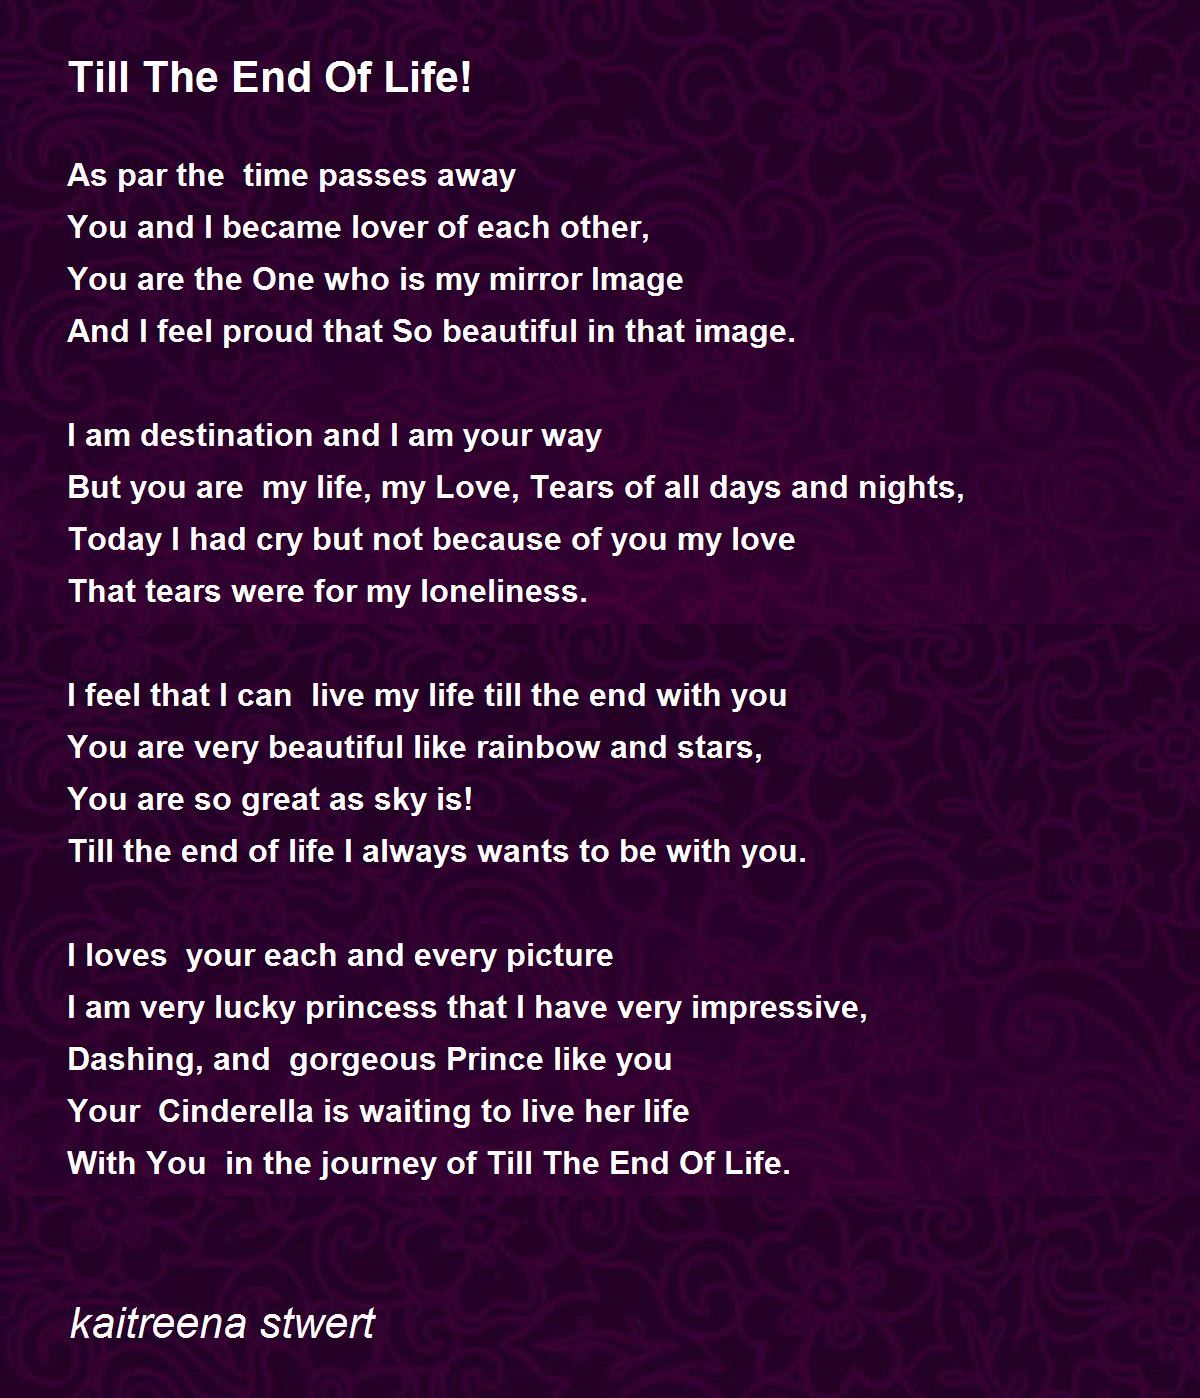 Till The End Of Life! by kaitreena stwert - Till The End Of Life! Poem